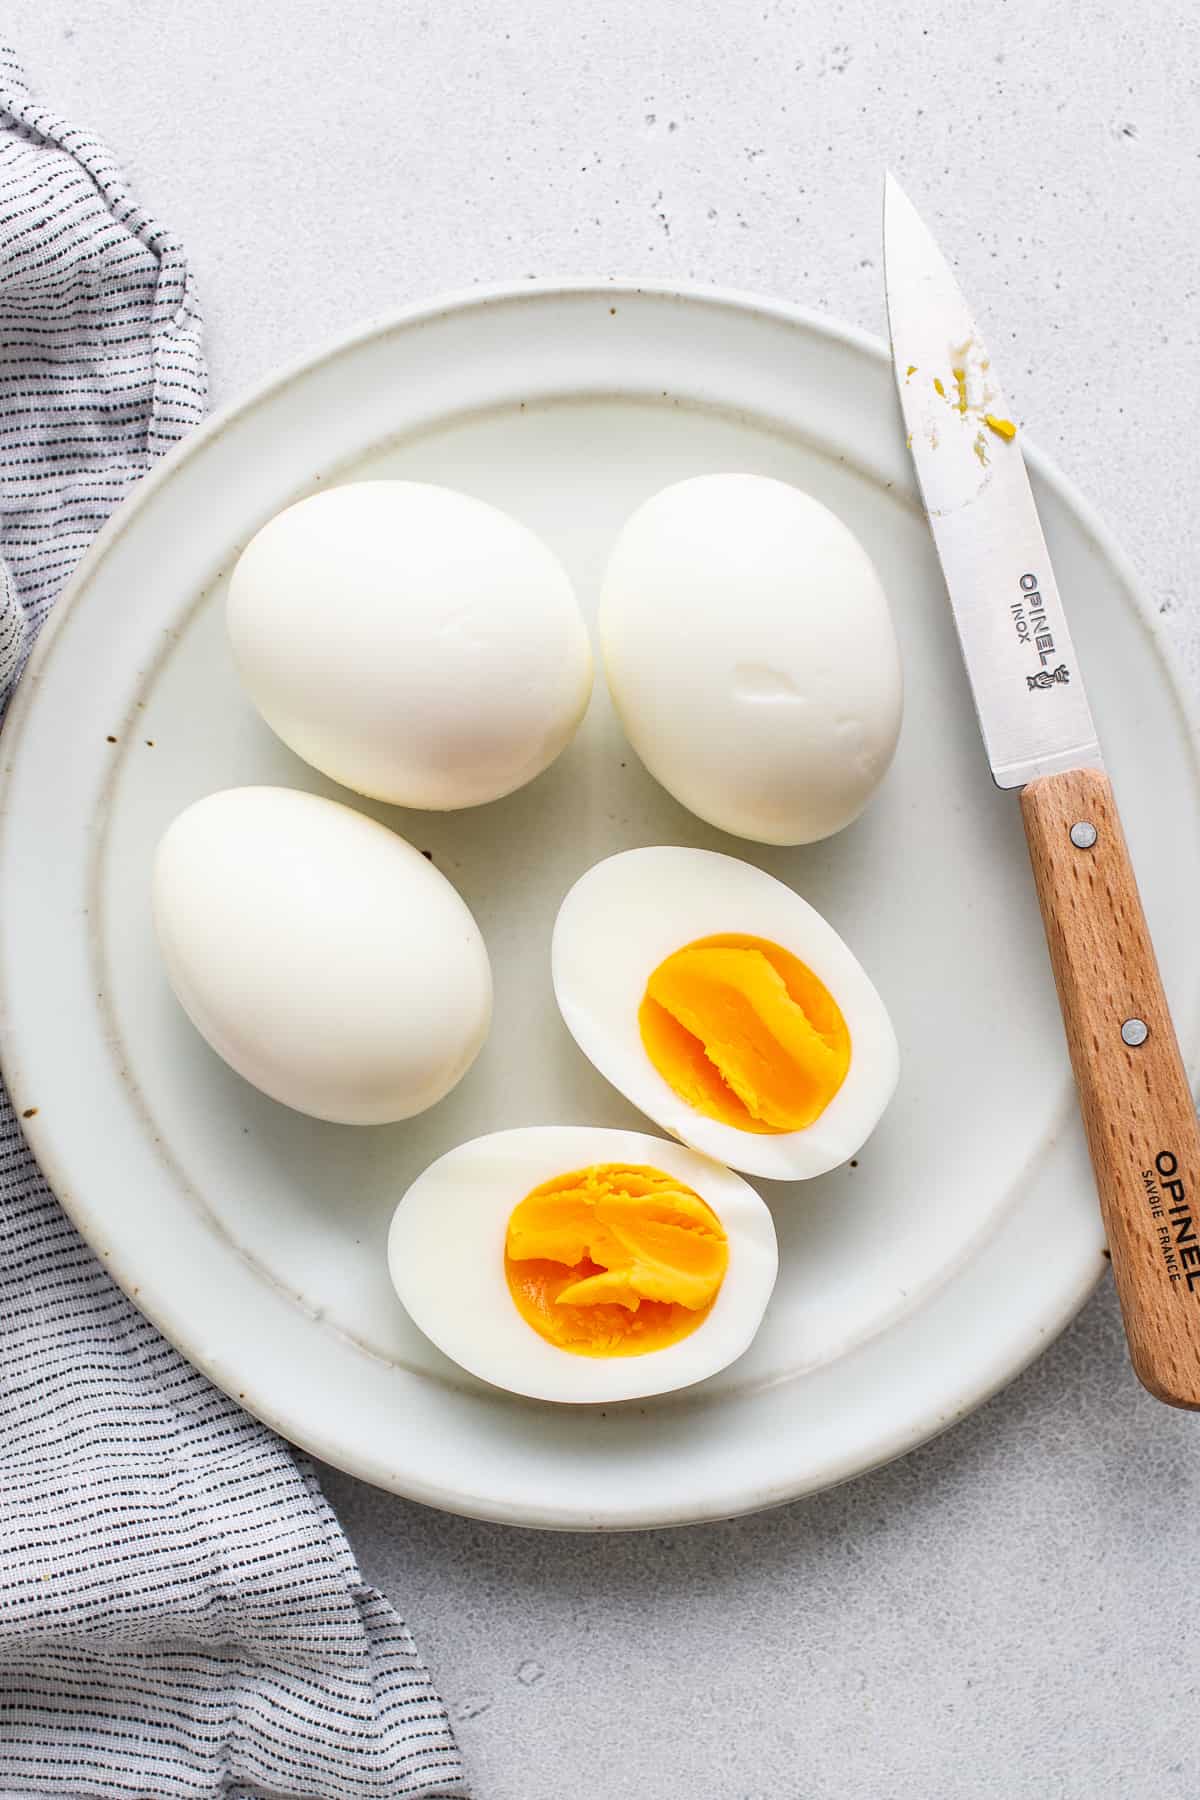 Hard boiled eggs on a plate.